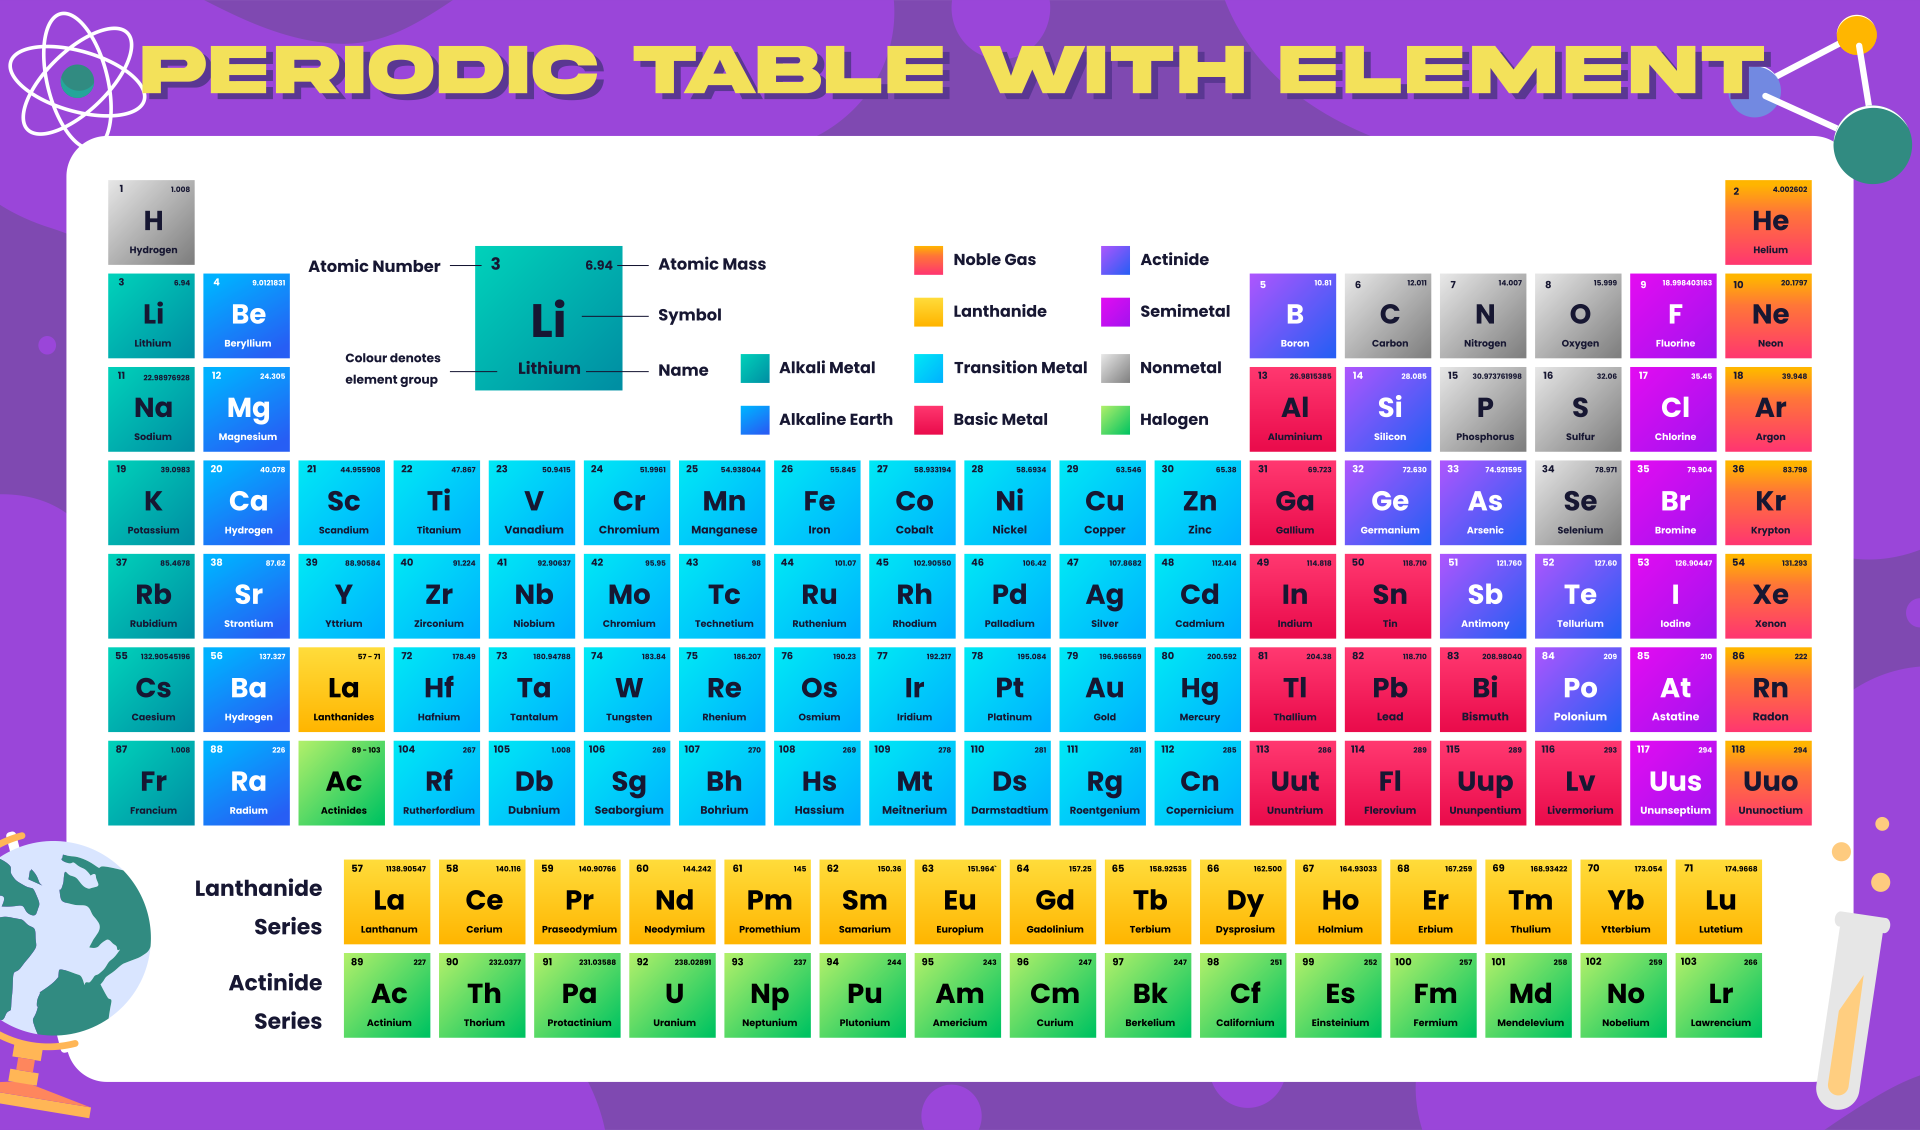 printable-periodic-table-of-elements-with-everything-labeled-pdf